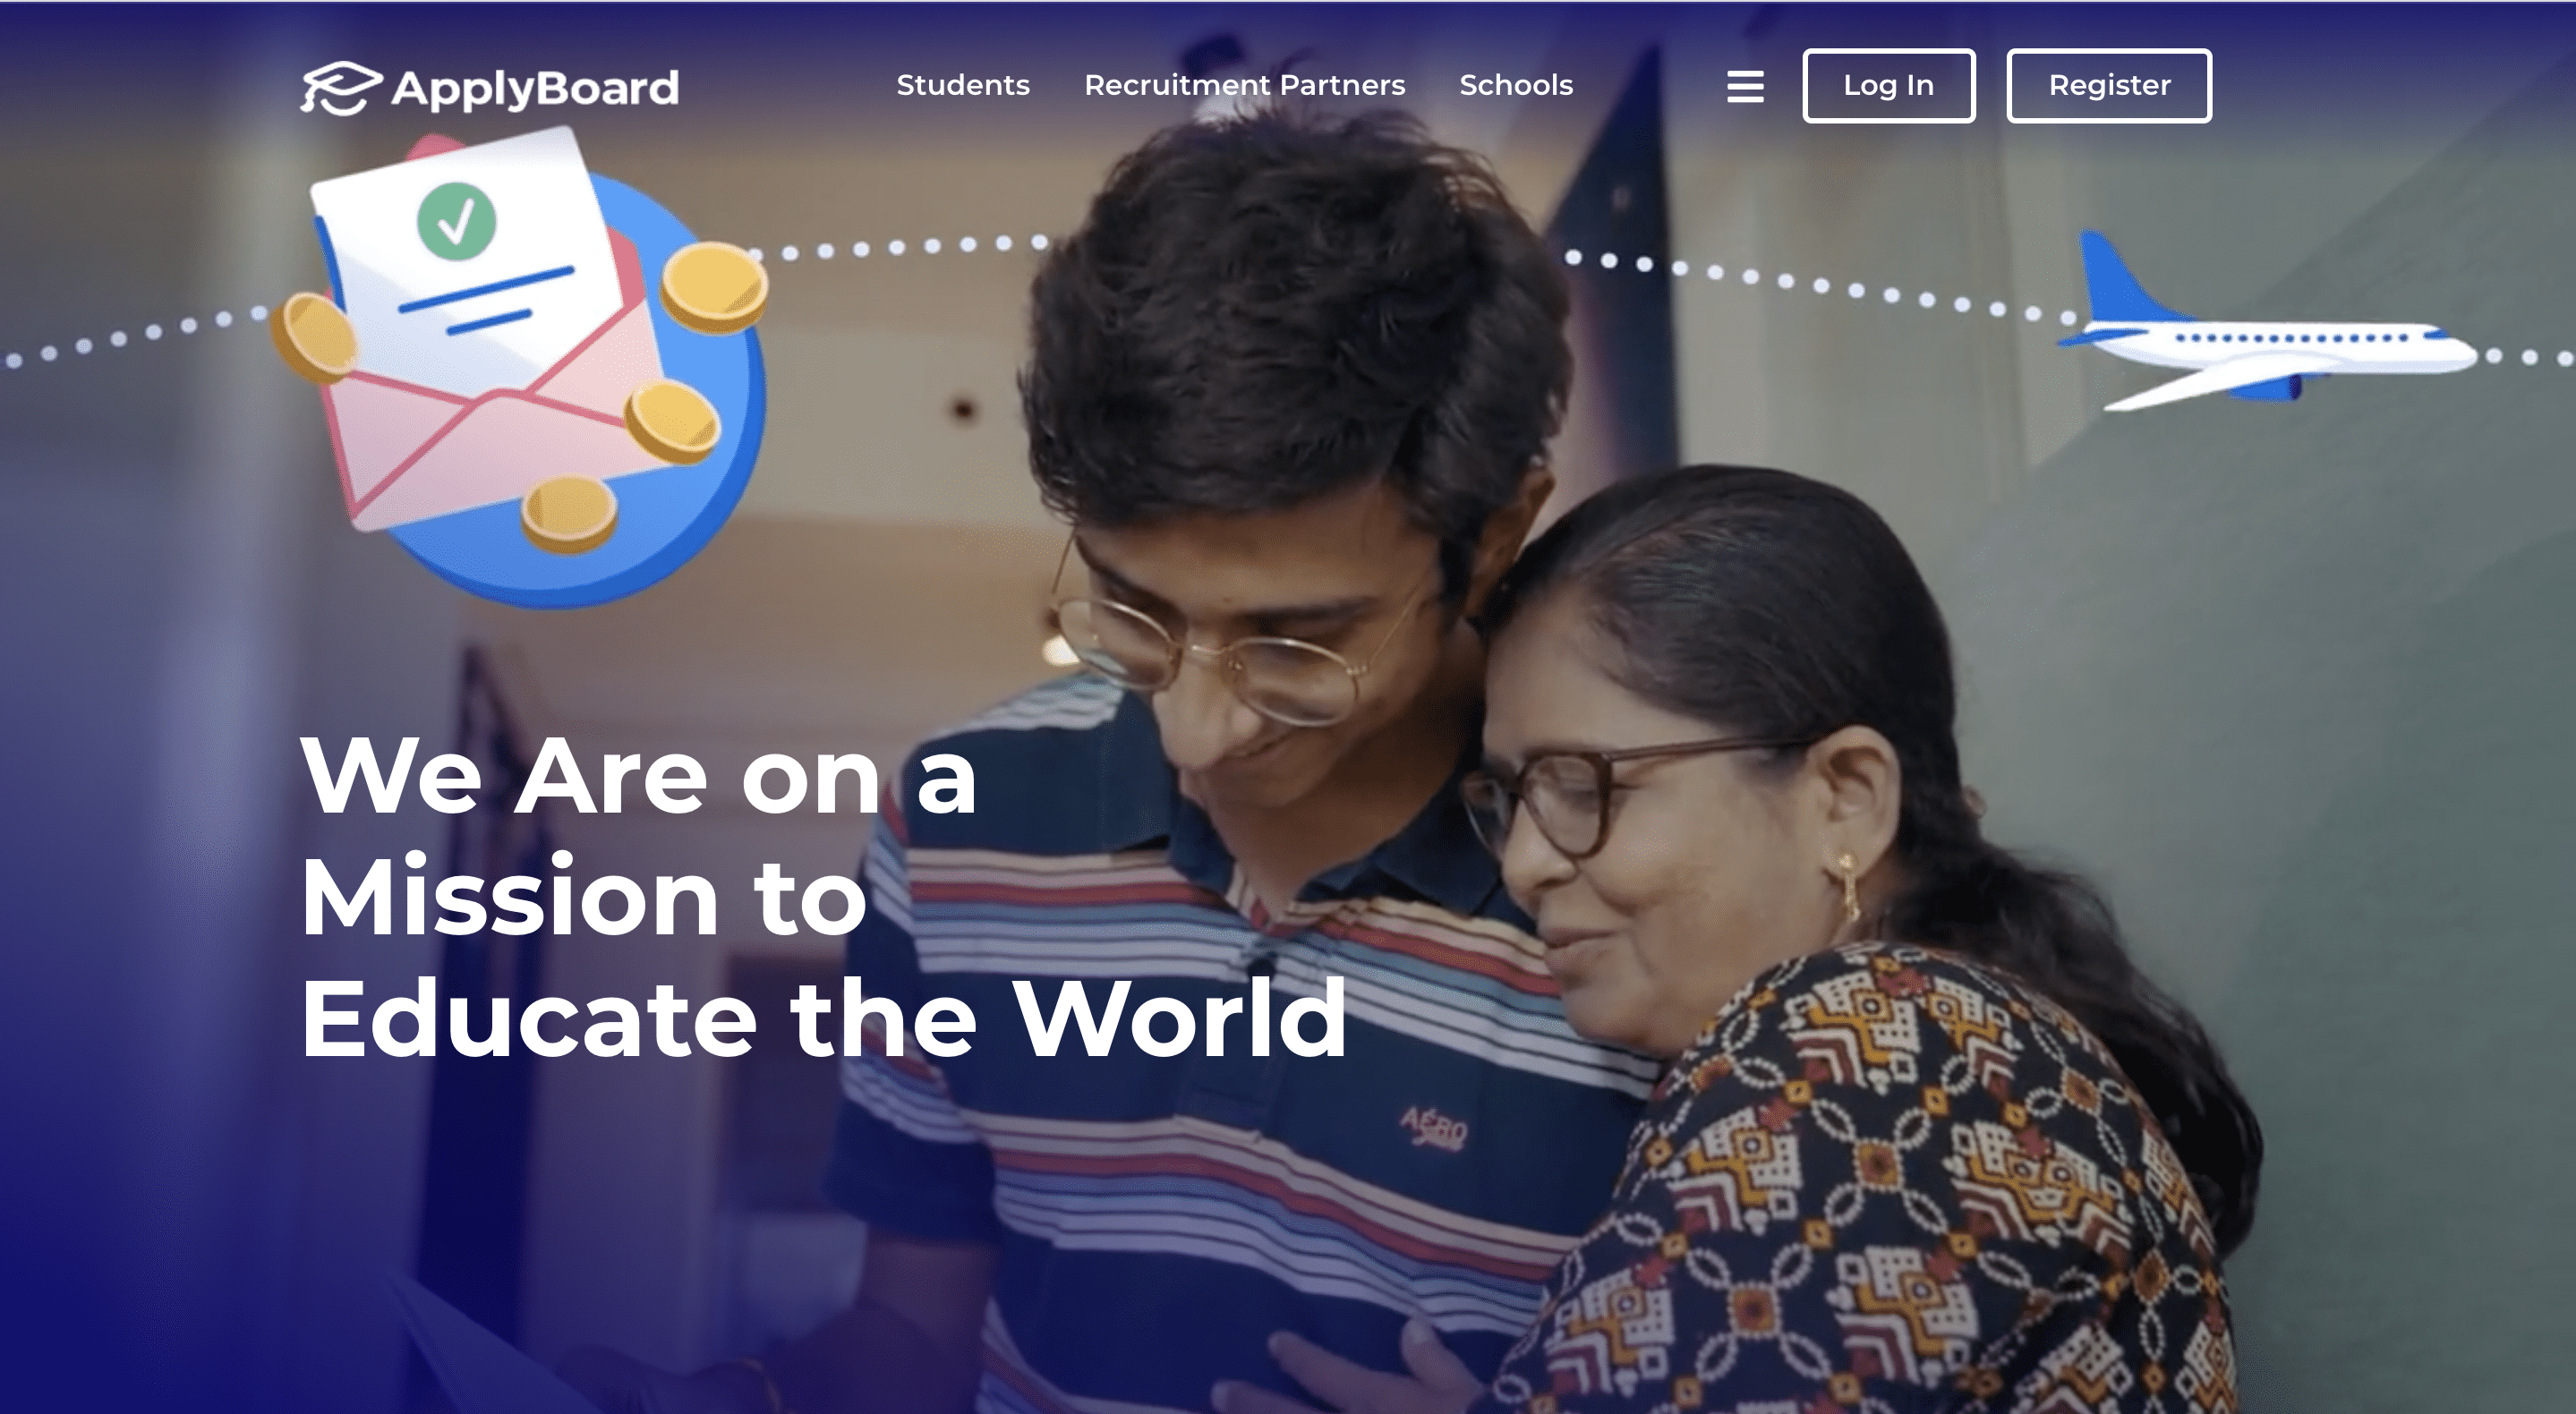 A photo of ApplyBoard's new website design.